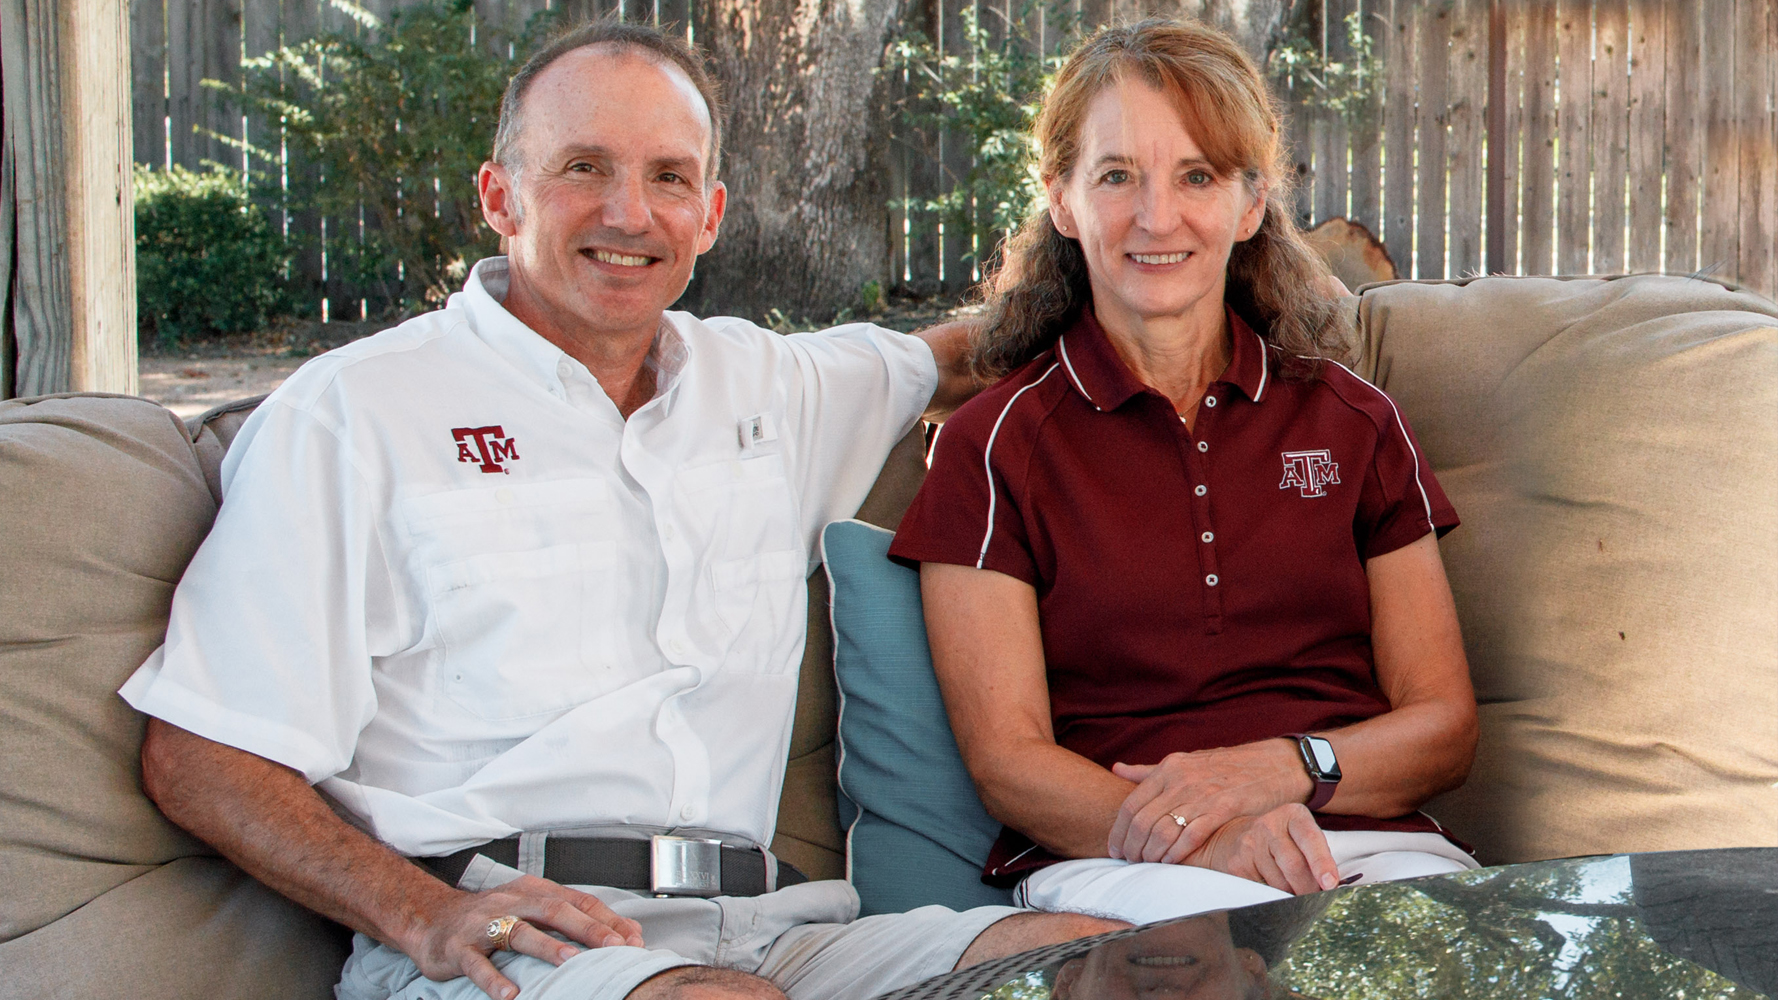 Kerry'85 (left) and Angela Stein'85 at their  home. Photo courtesy of the Texas A&M University Foundation.